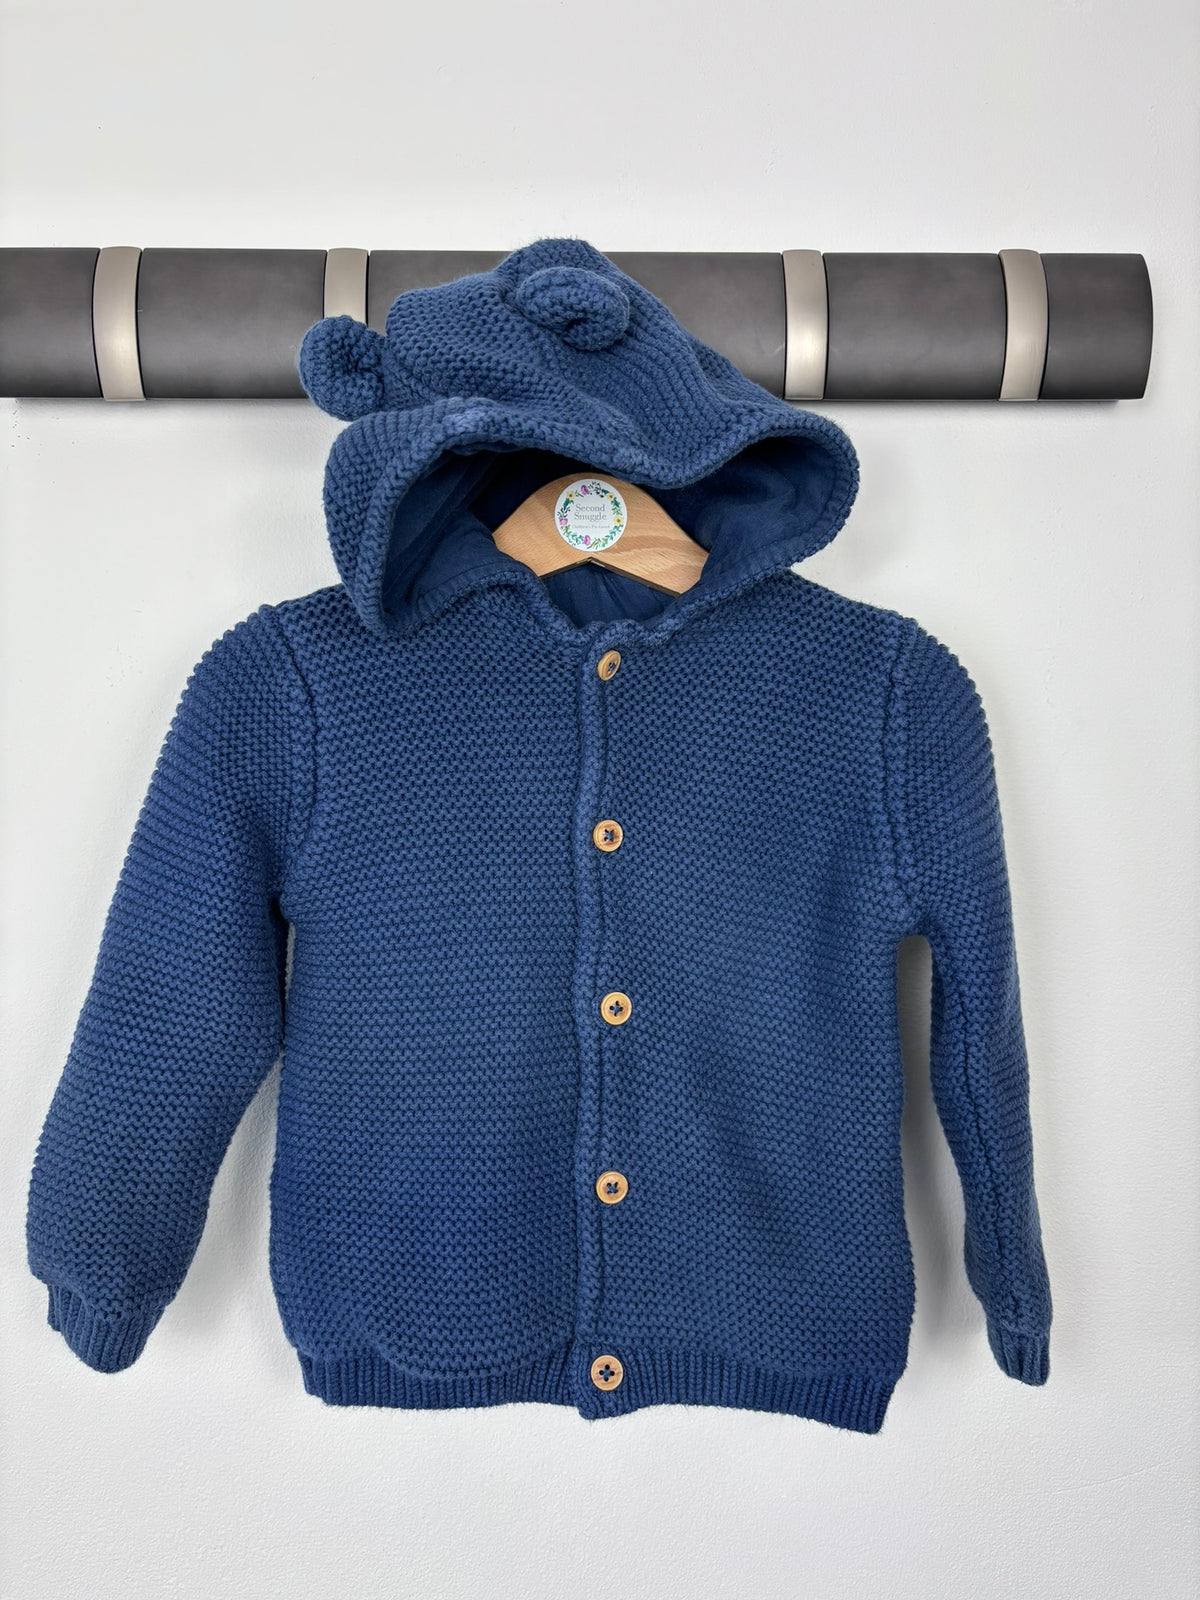 M&S 18-24 Months-Cardigans-Second Snuggle Preloved